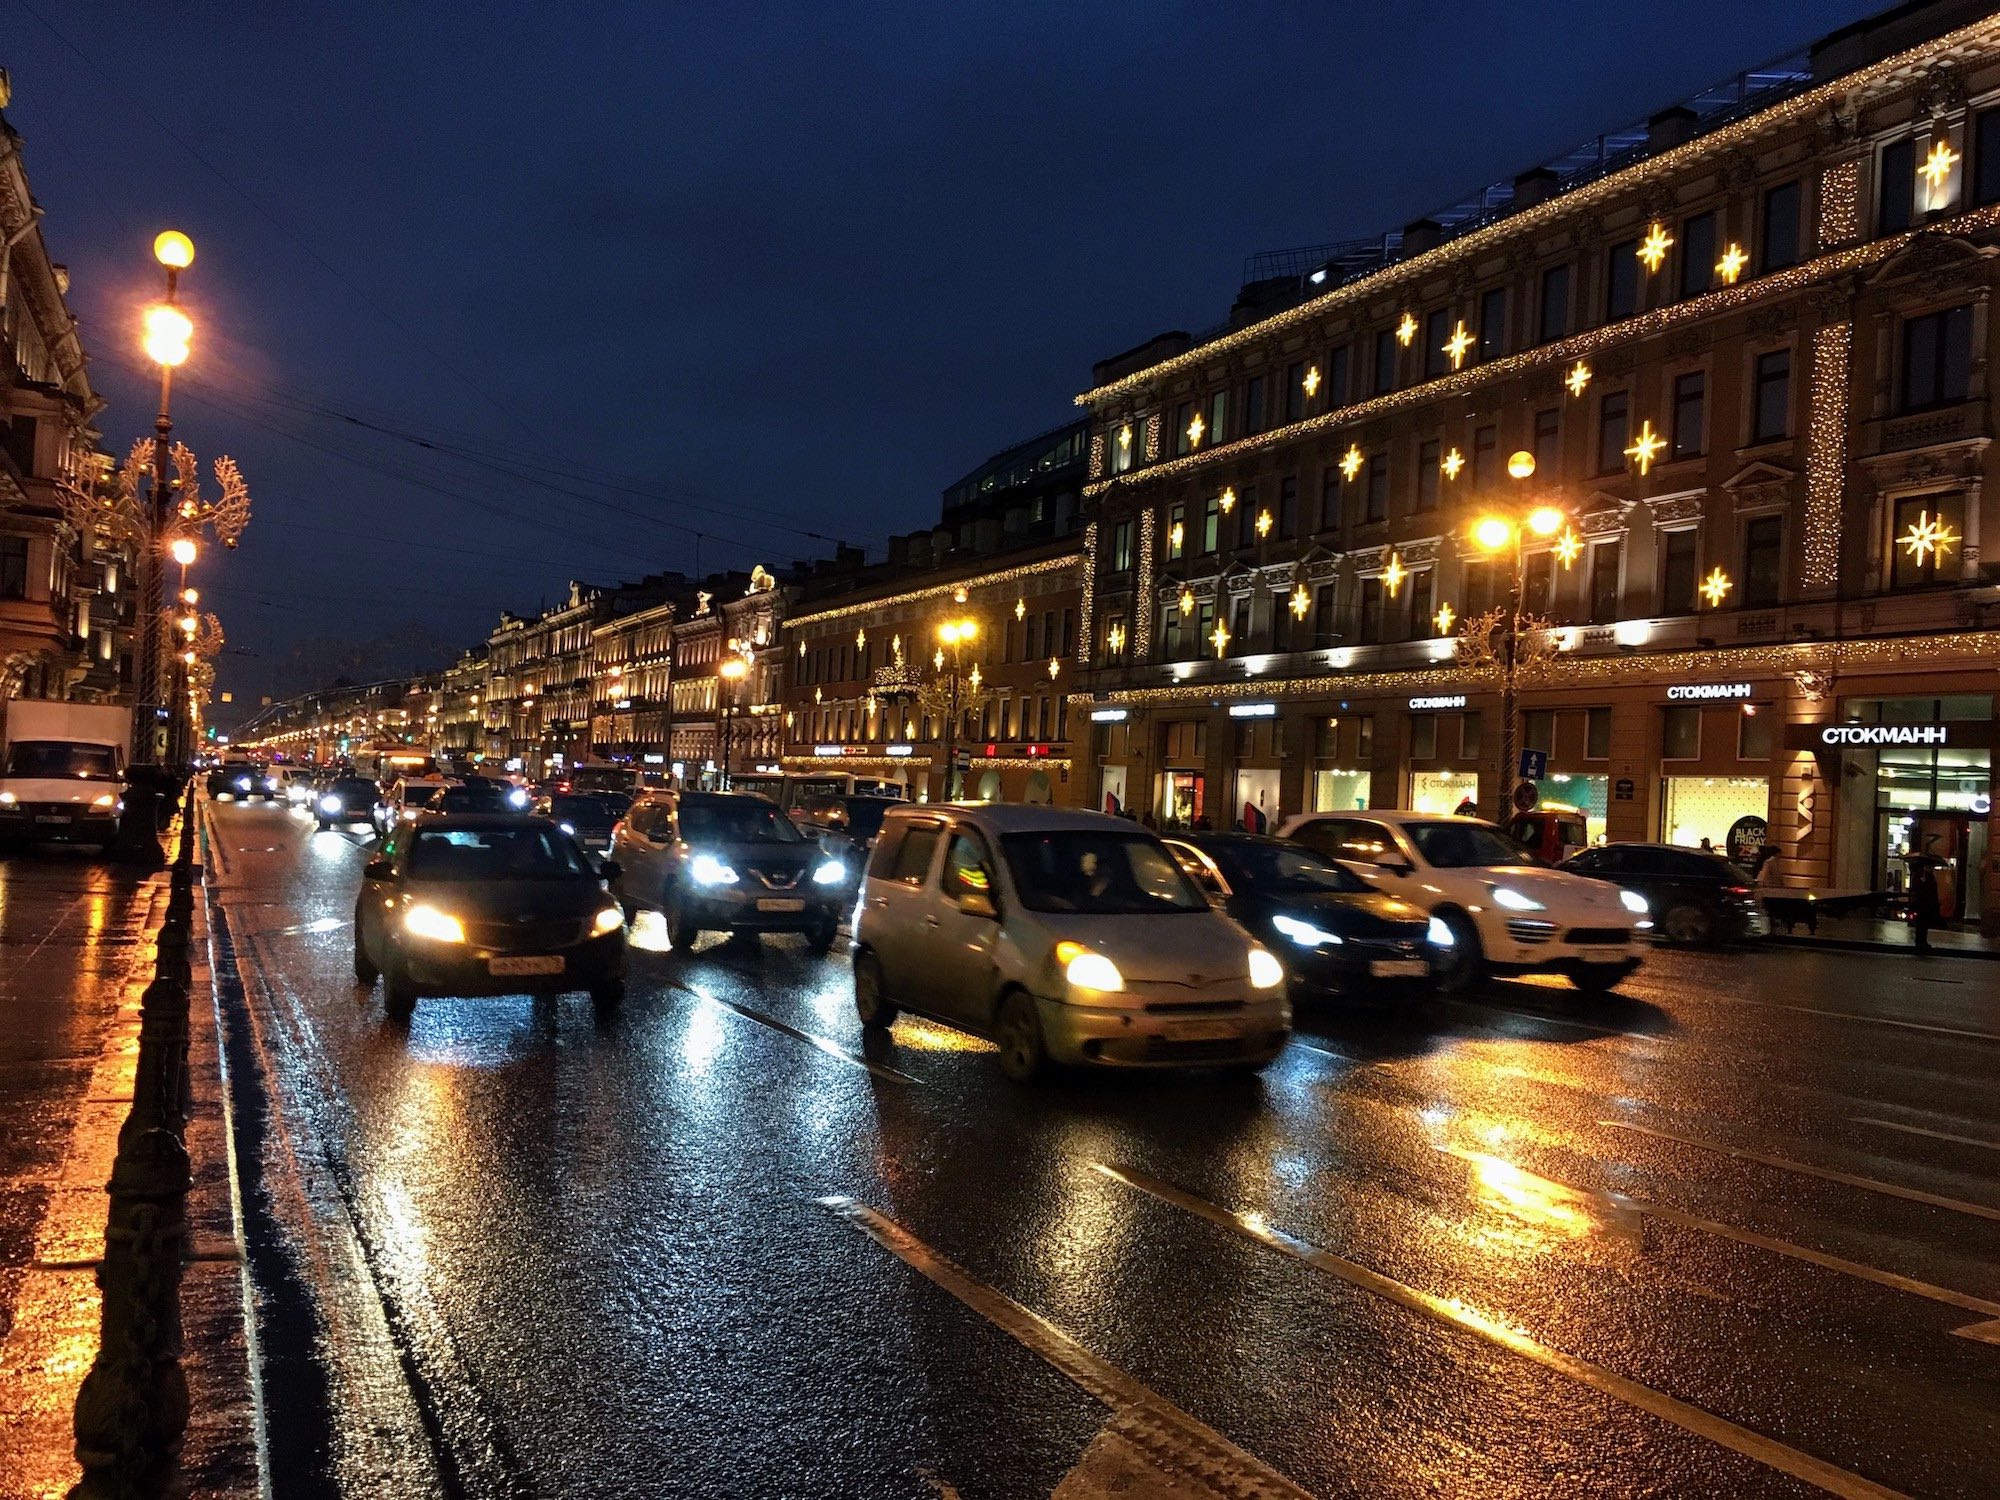 Nevsky Prospekt is a major road through the center of Saint Petersburg, and illuminated nicely during the night.